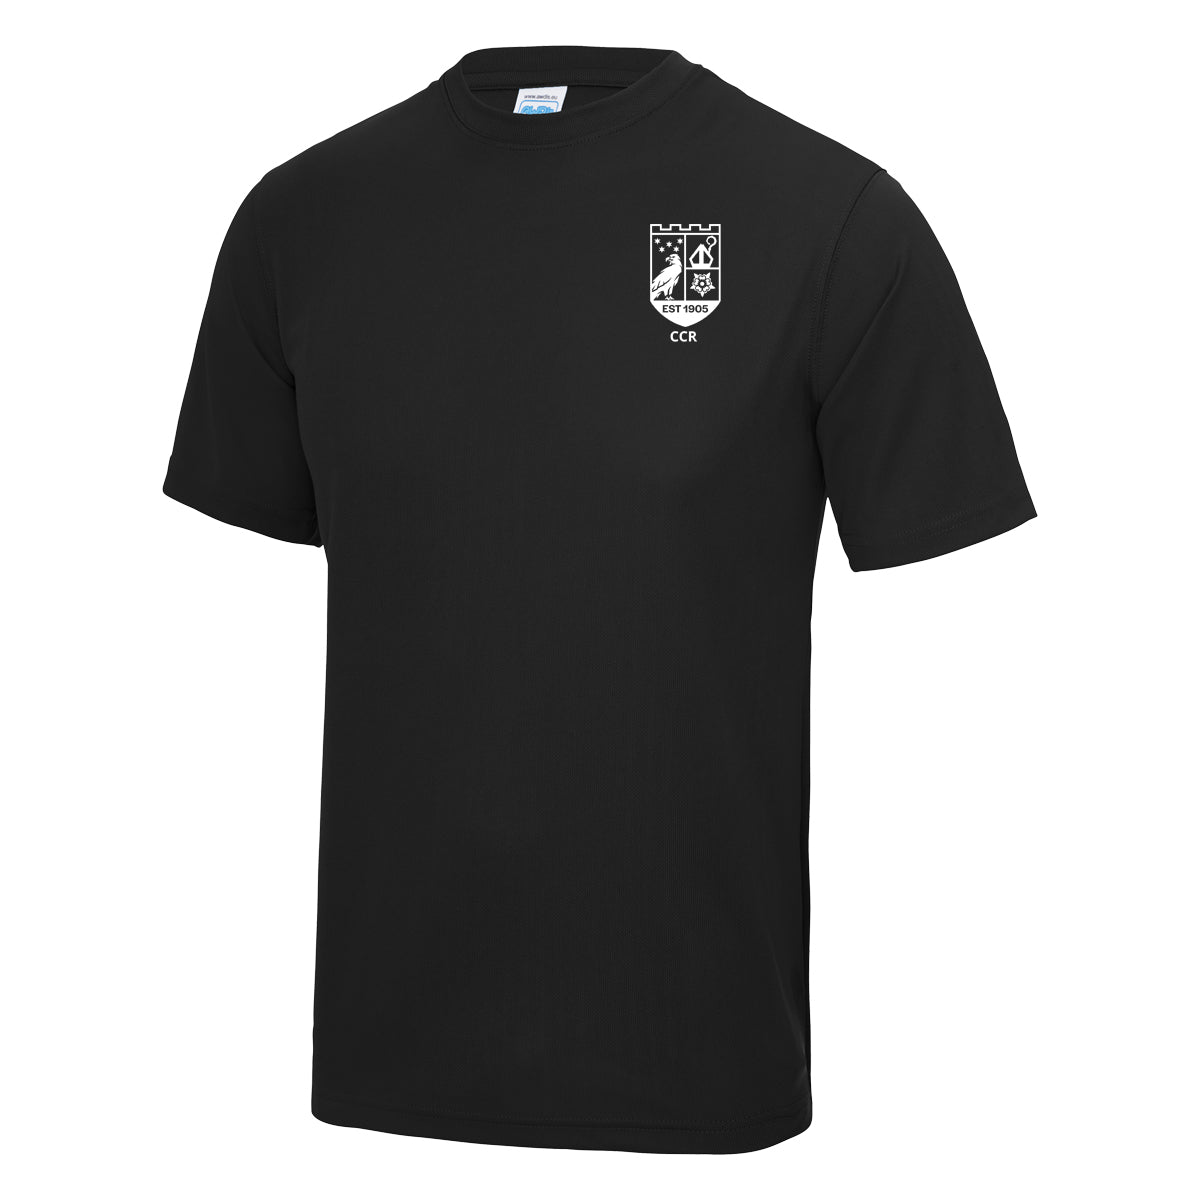 Cistercian College Roscrea PE T-Shirt available from Uniformity